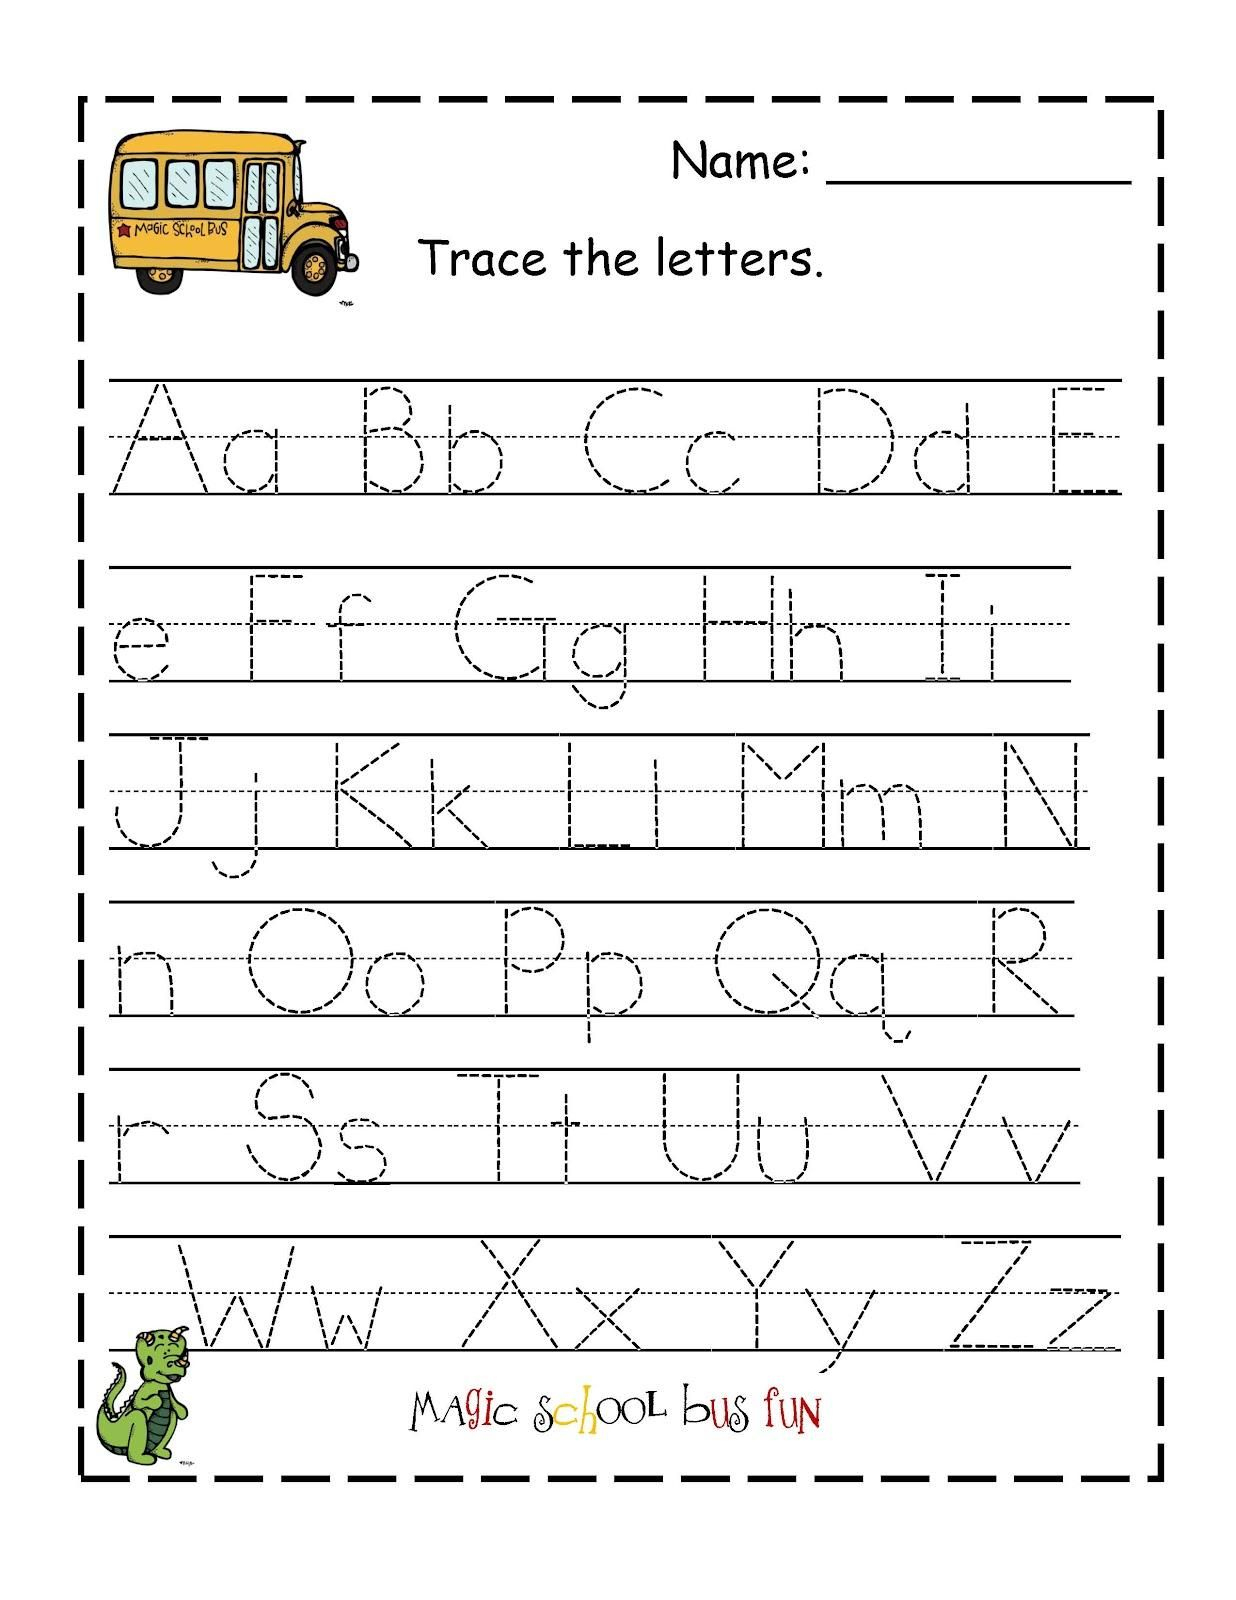 Free Printable Abc Tracing Worksheets #2 | Places To Visit | Free Printable Handwriting Worksheets